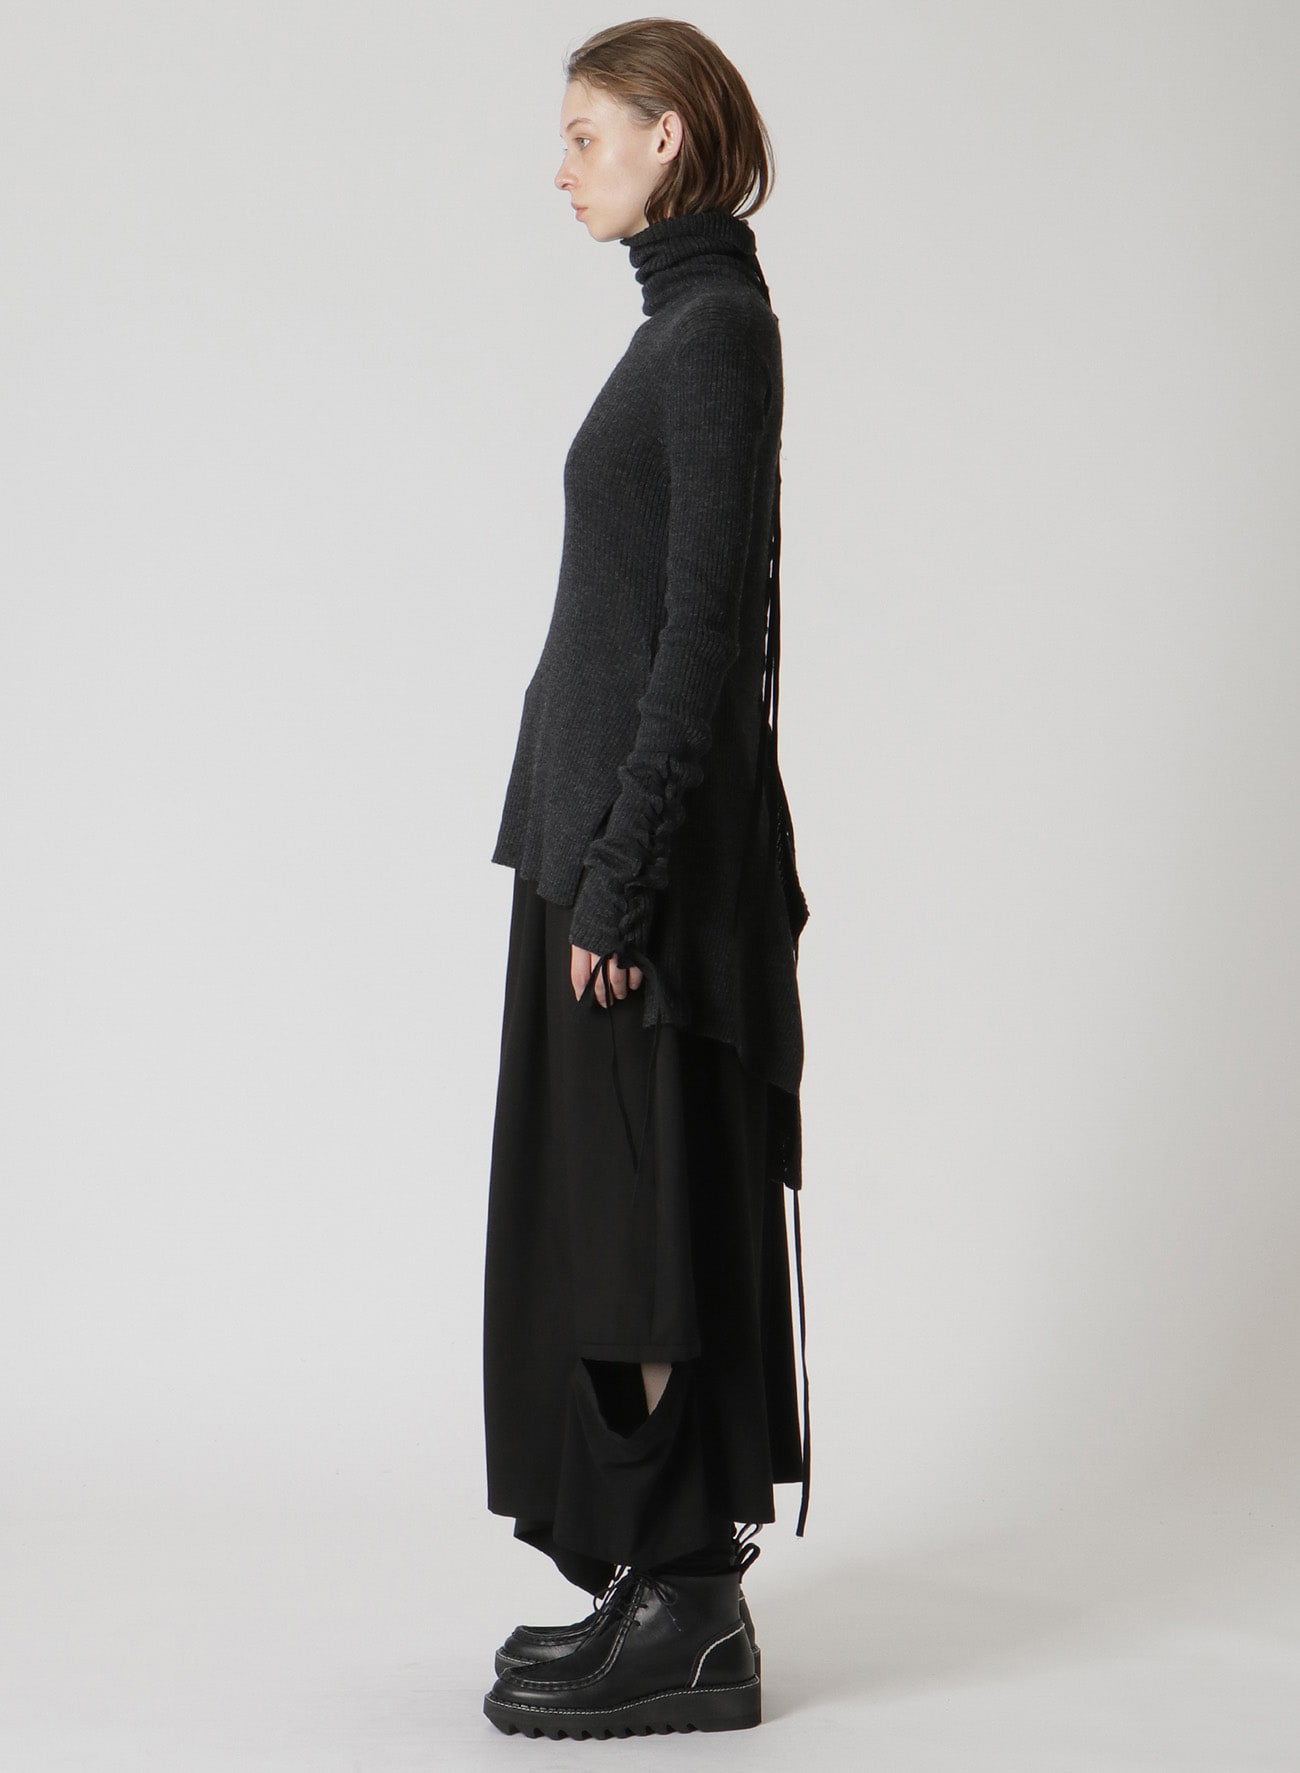 WOOL LACE-UP BACK/SLEEVE DETAIL SWEATER(S Charcoal): Y's｜THE SHOP ...